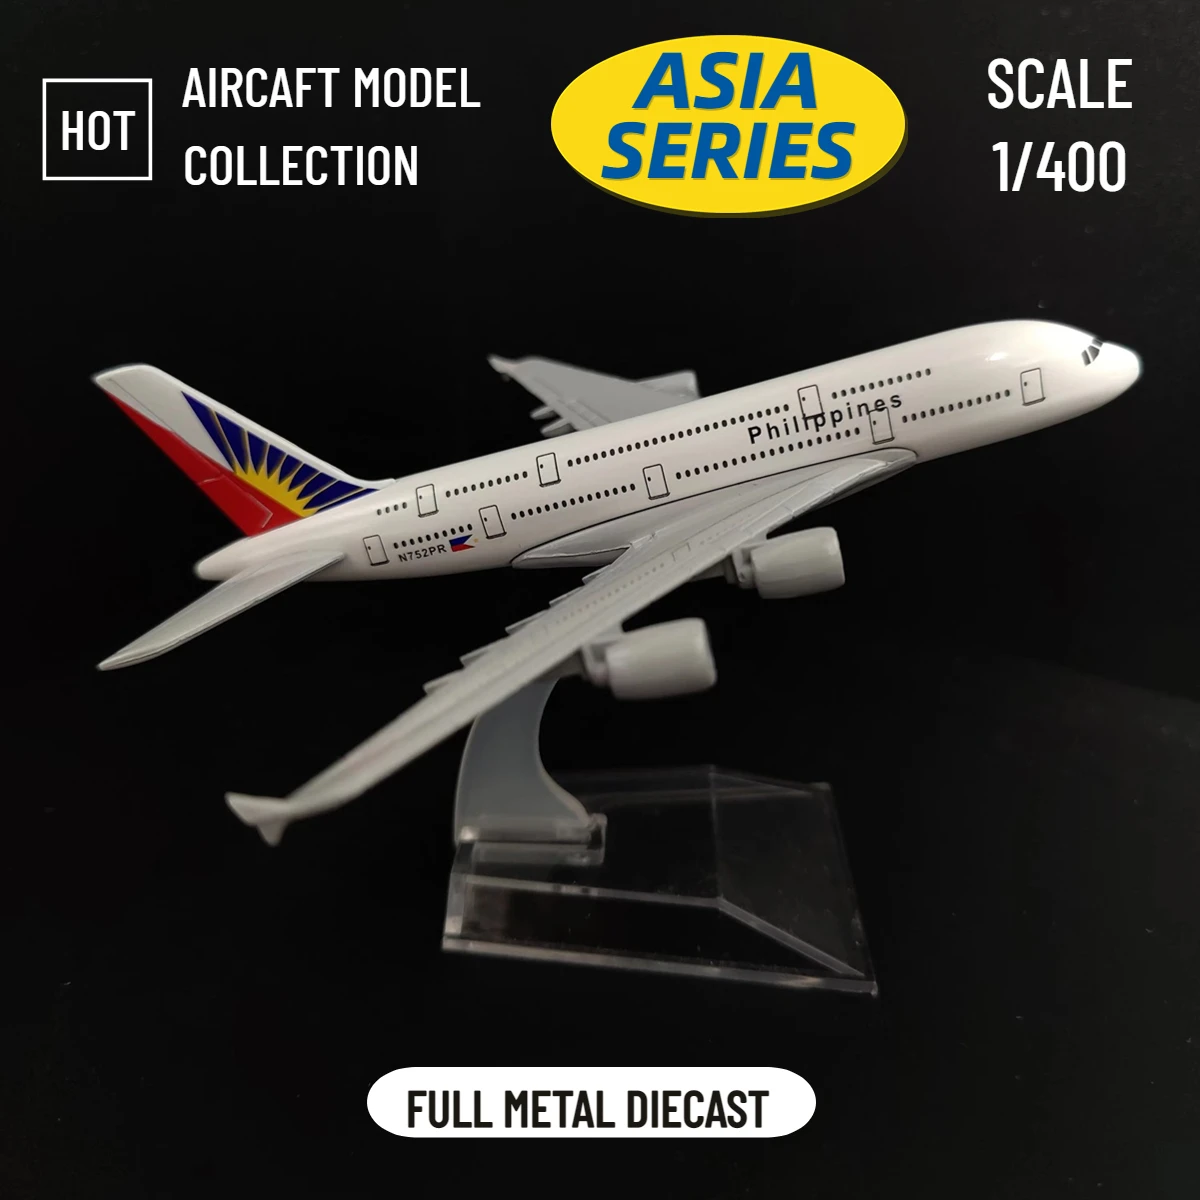 

Scale 1:400 Metal Airplane Replica 15cm Philippines Airlines Boeing Airbus Model Diecast Aircraft Miniature Gift for Boy Girl